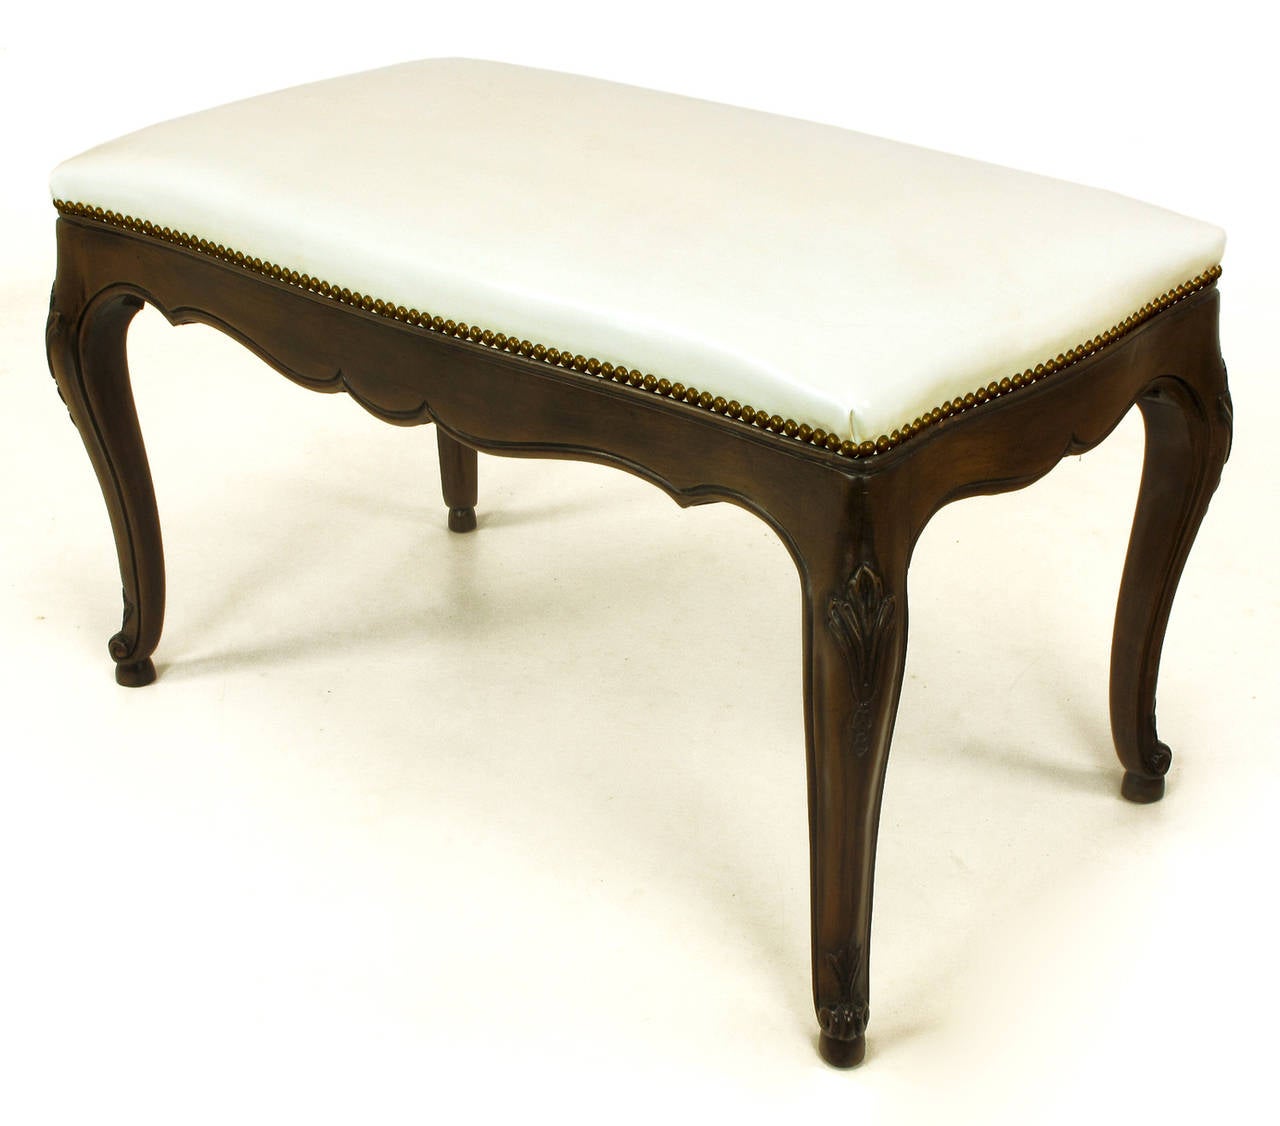 Kindel Furniture of Grand Rapids vintage cabriole leg walnut bench with French Regency carved detailing and white leather seat with brass nailhead appointments.